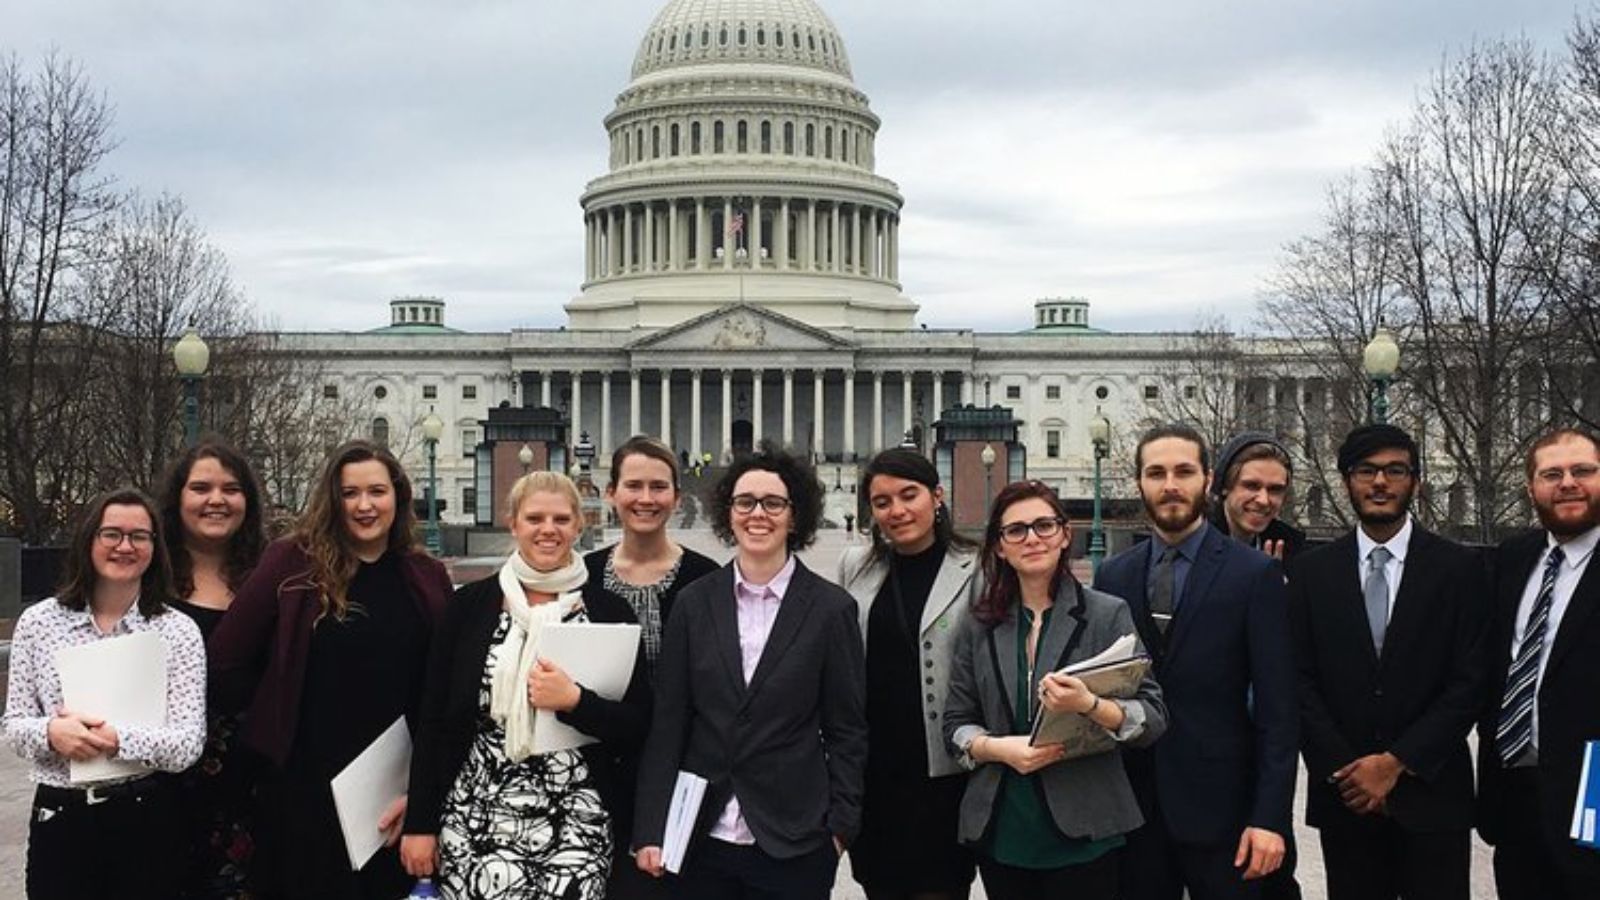 Student advocates from across the country take part in a lobby day in Washington, D.C.